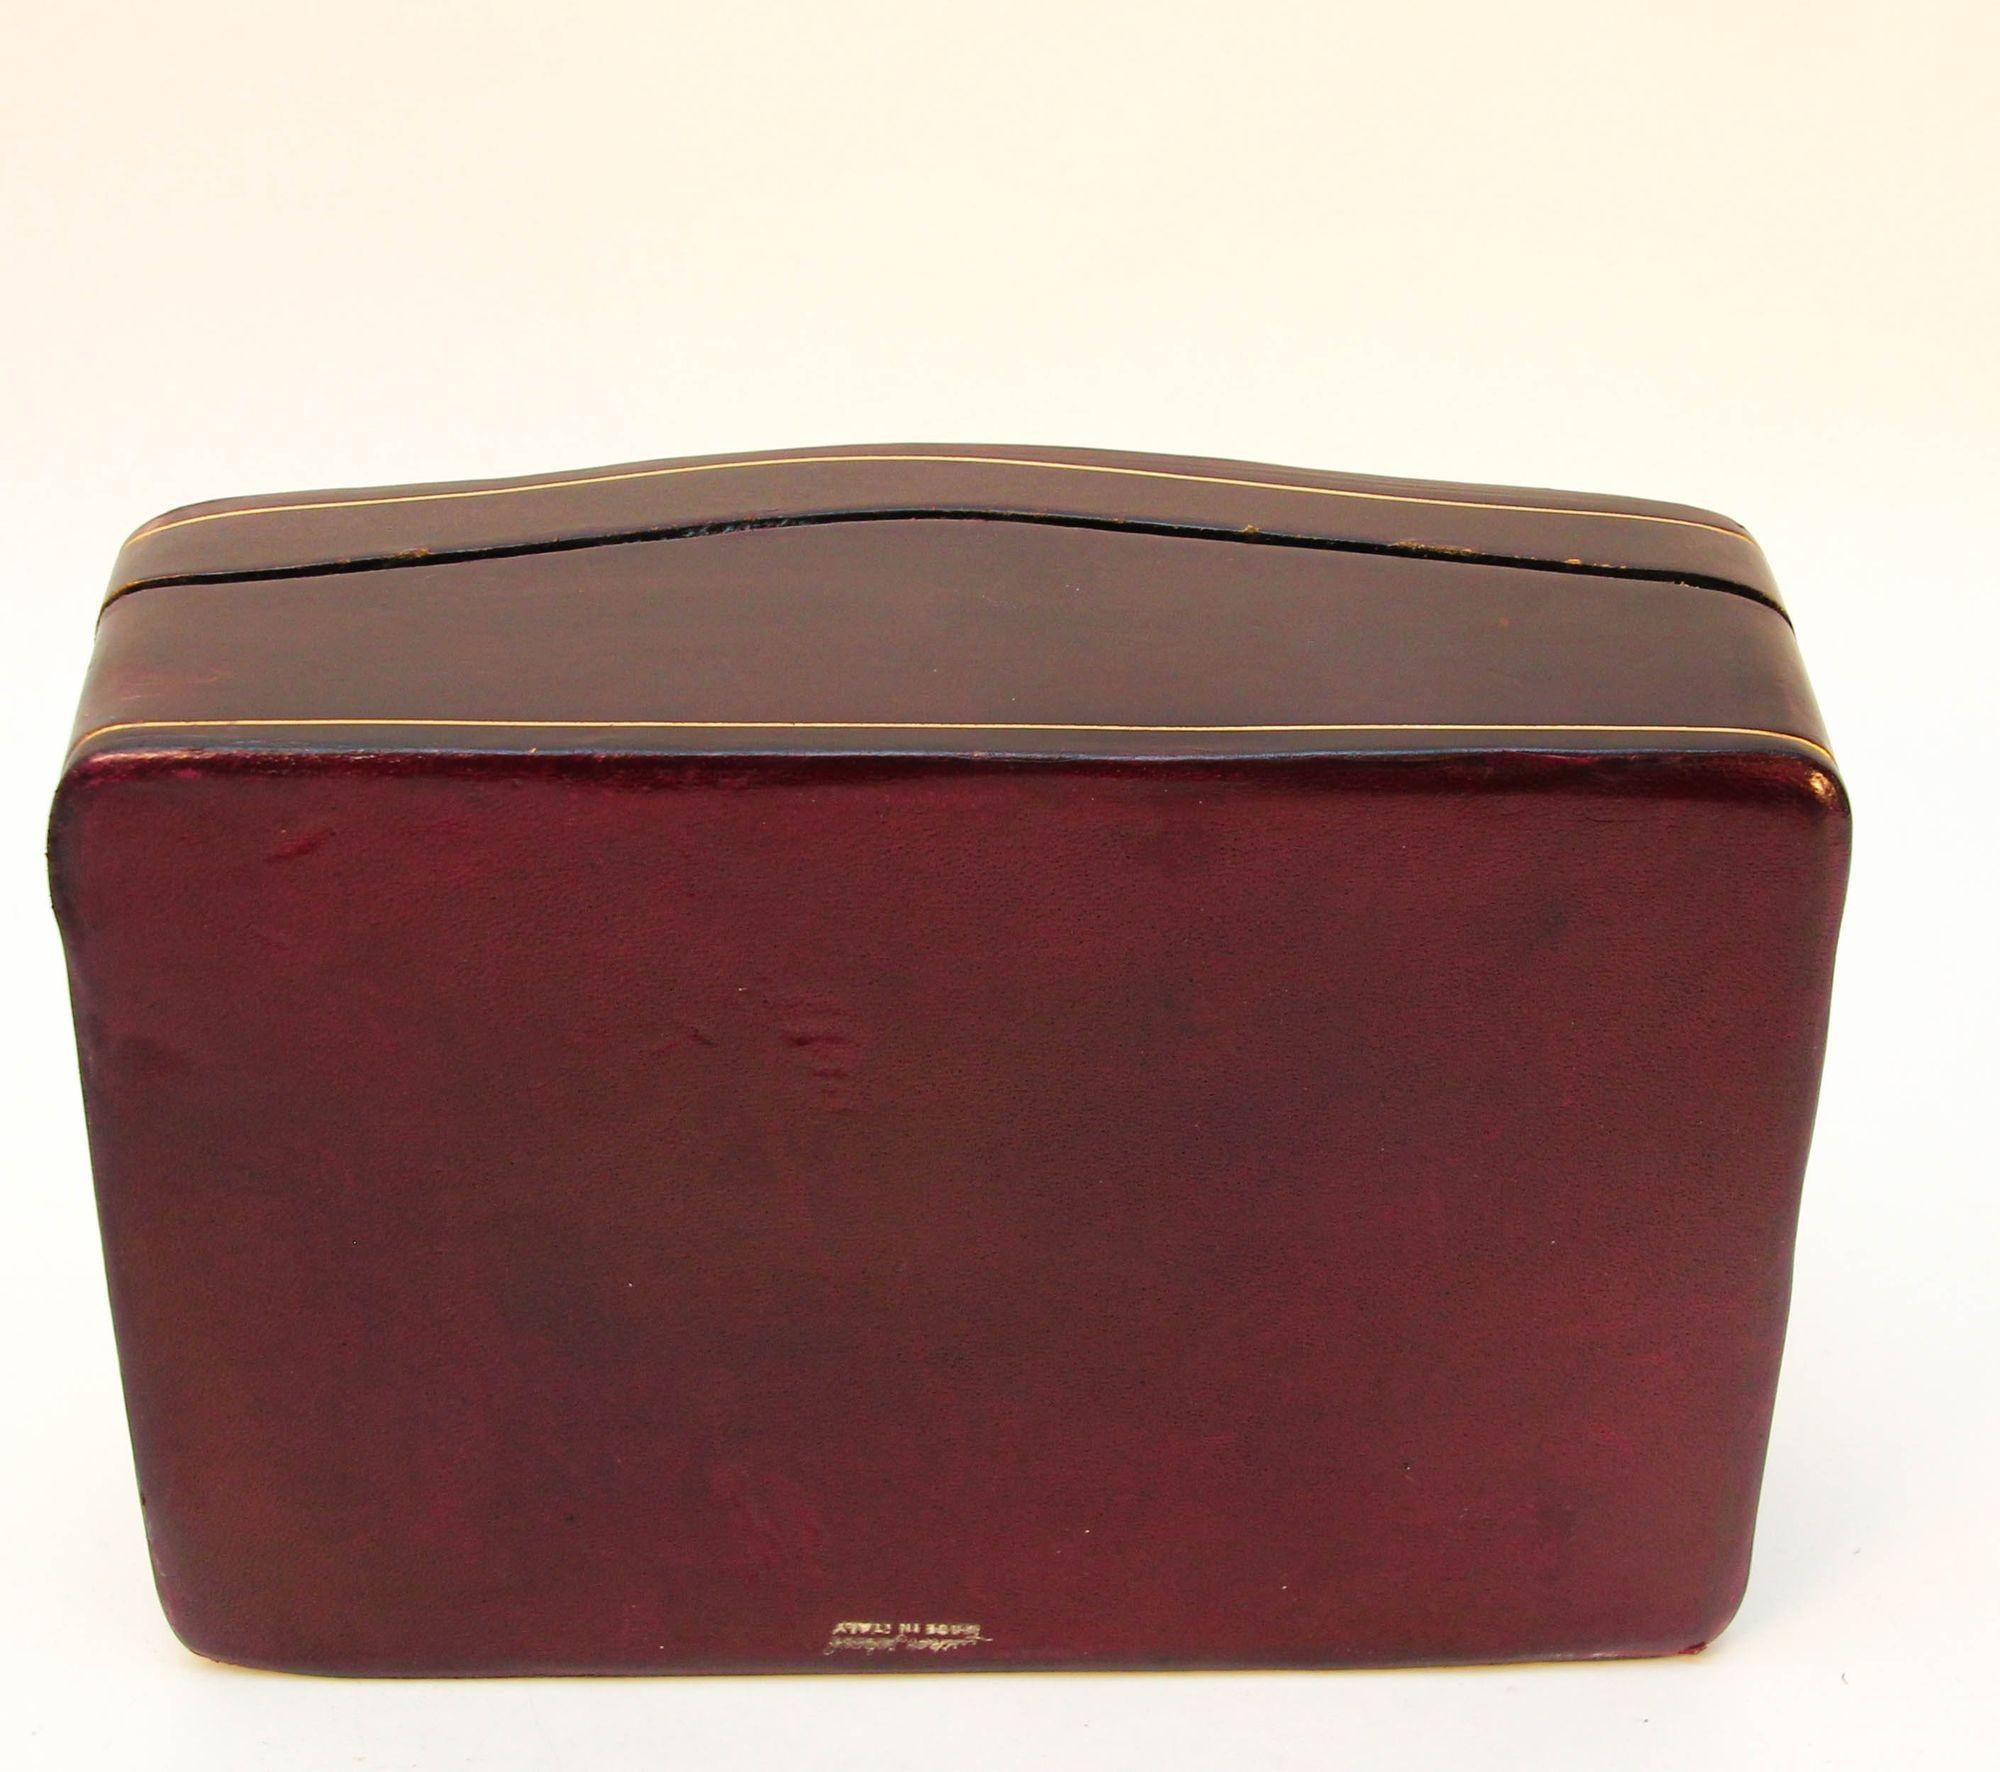 1960s Venetian Brown Leather Humpback Box with Gold Embossed Trim Made in Italy 1